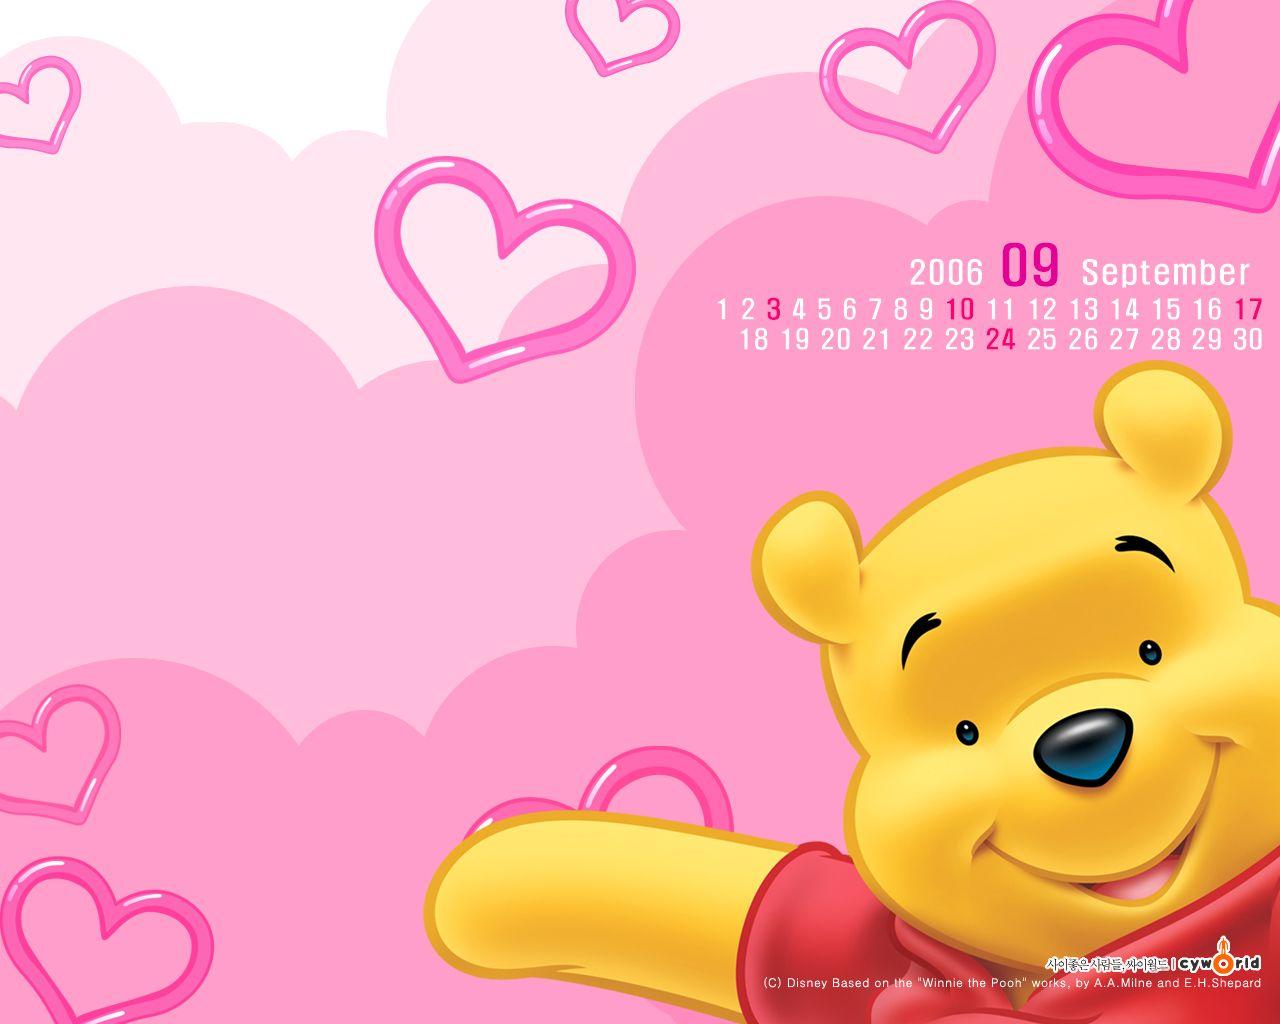 Awesome Winnie The Pooh Wallpaper HD Image Desktop Cave Of iPhone